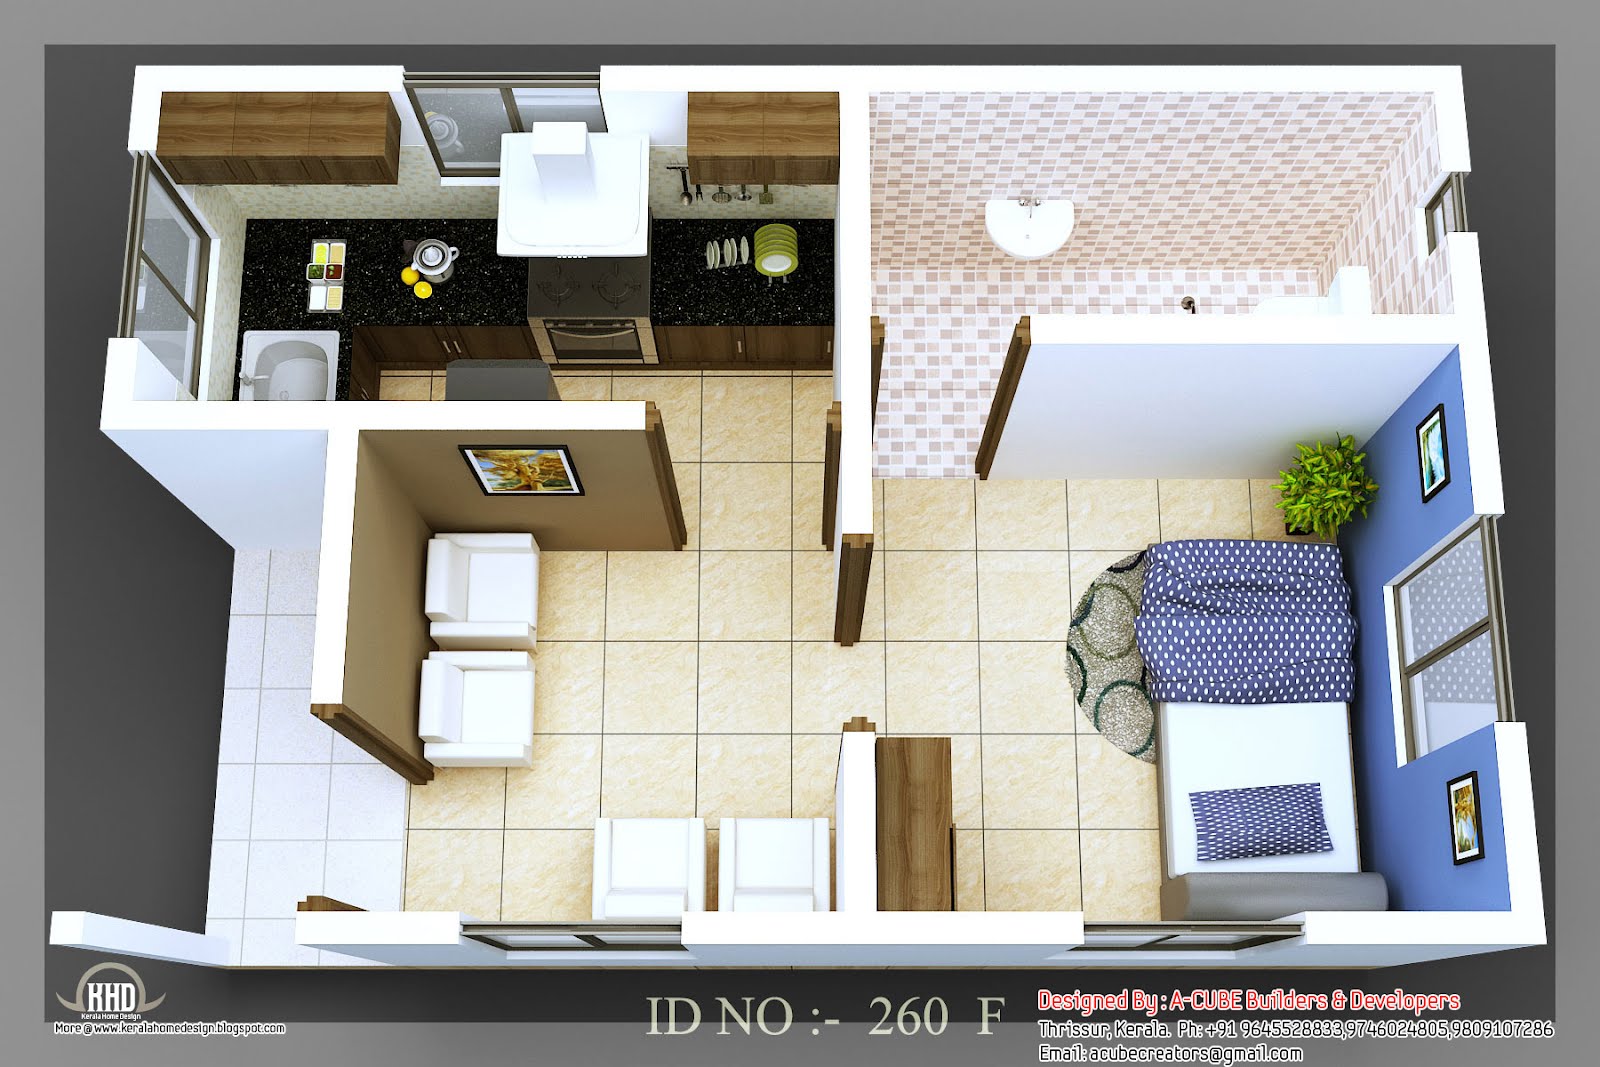 For More Information about this isometric small house plans